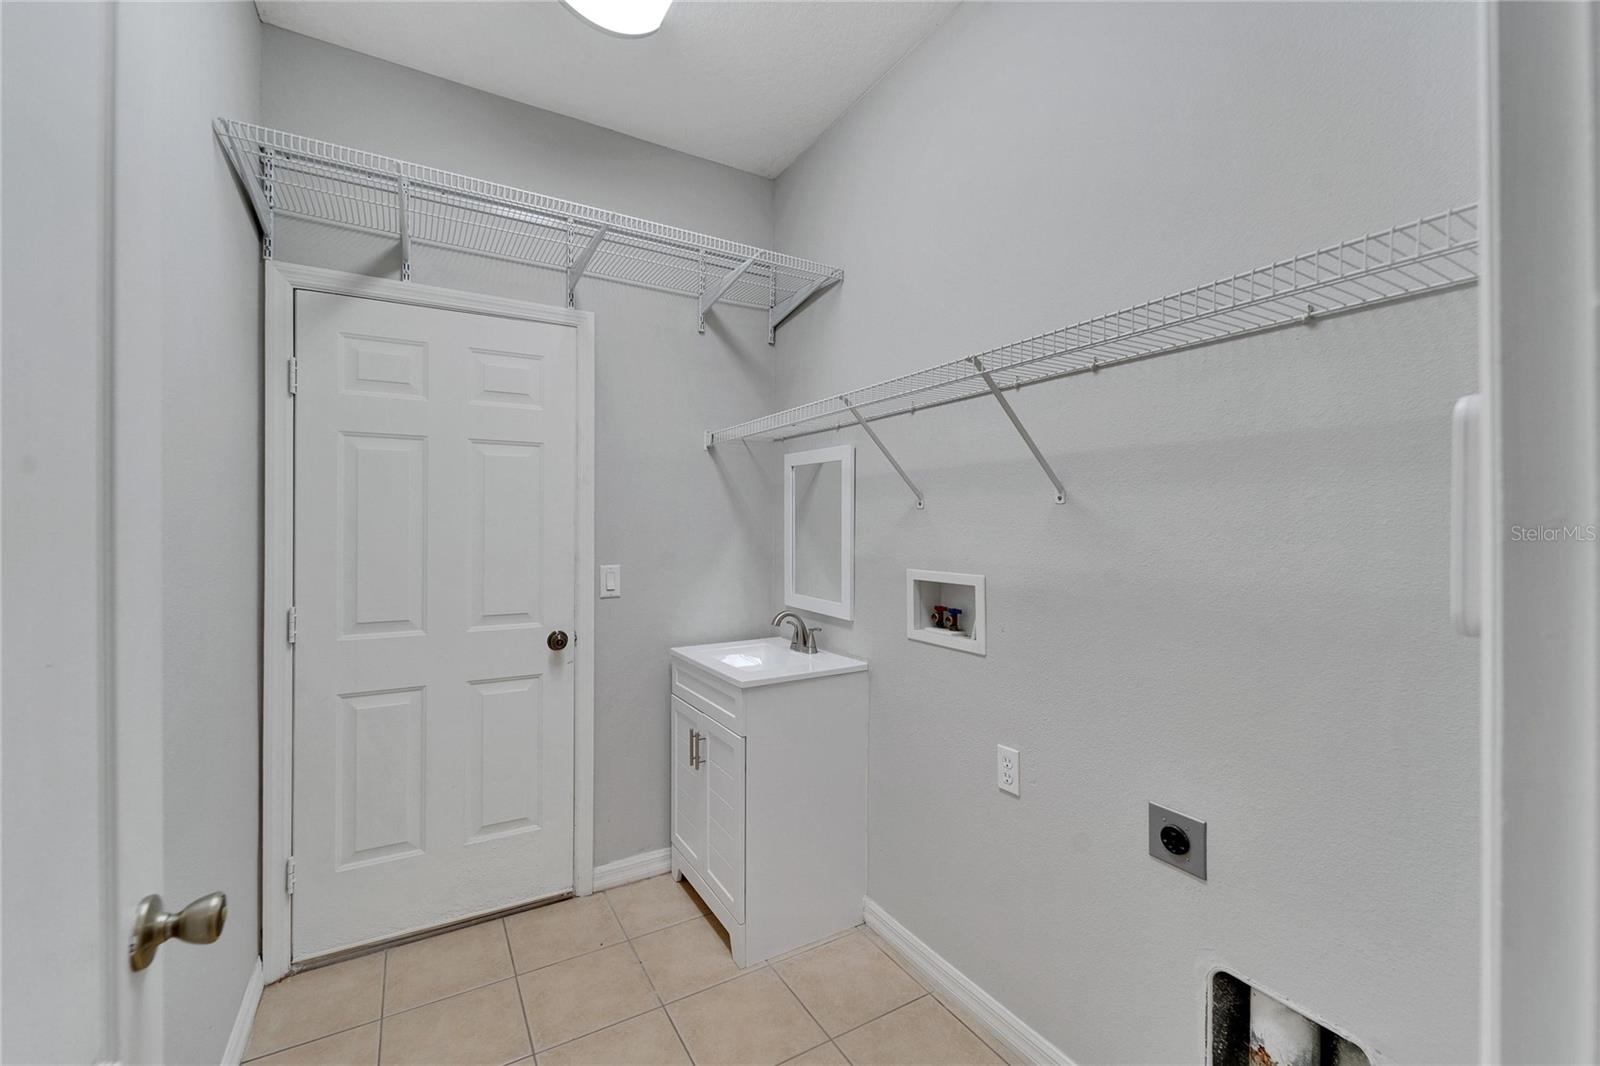 T3525431 - Laundry Room w/Access to Garage